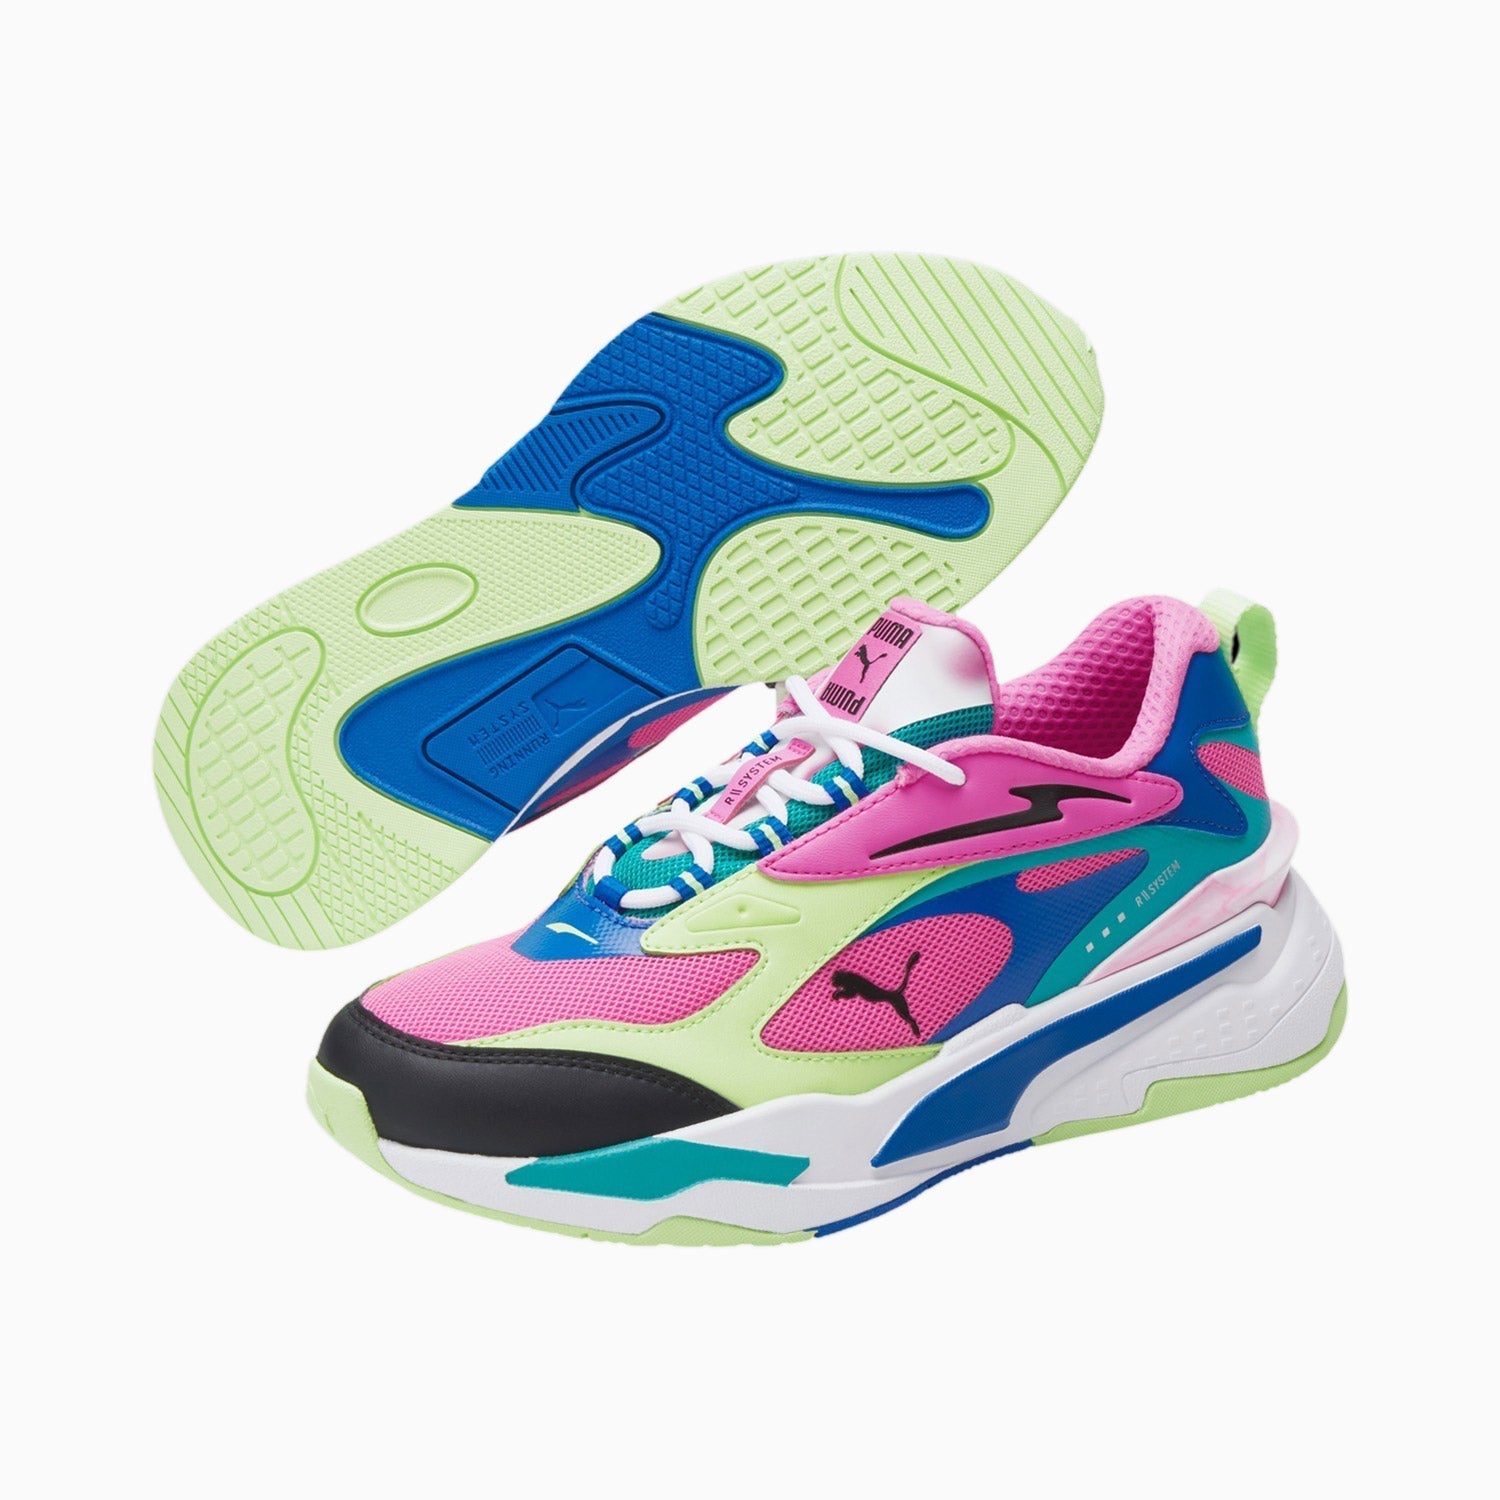 puma-womens-rs-fast-marble-sneakers-387045-01